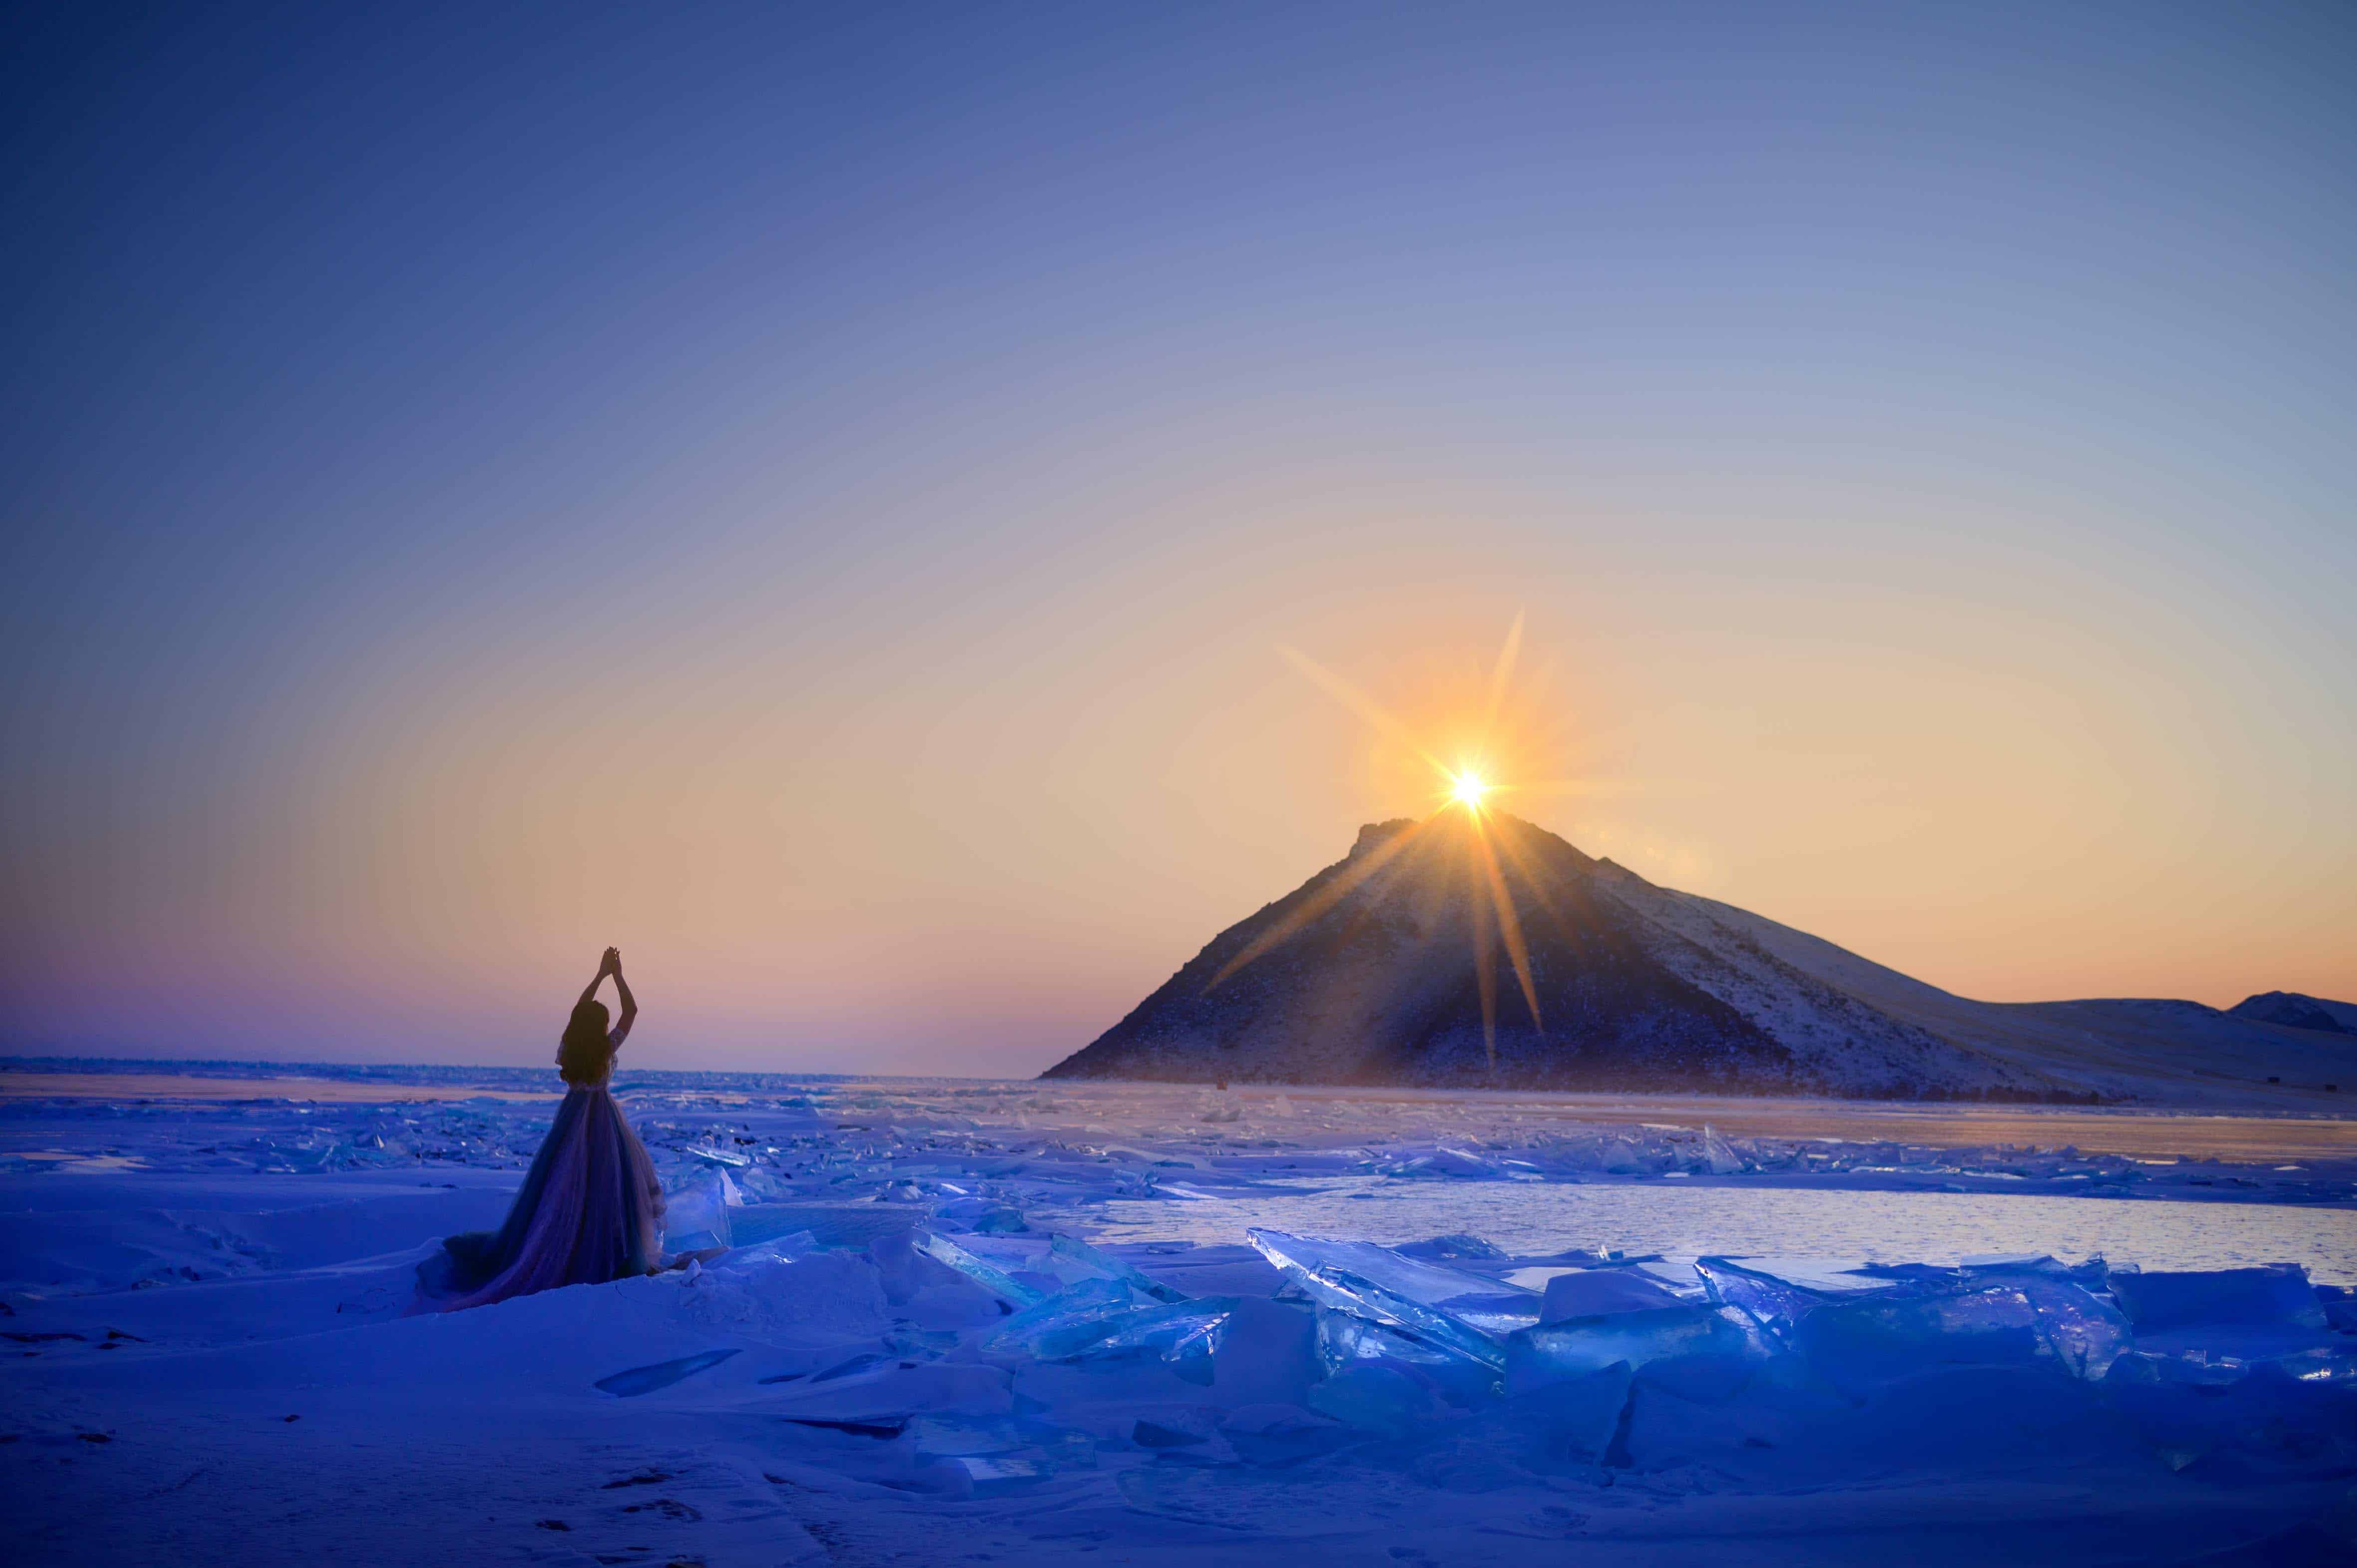 mysterious woman in a blue fluffy dress raising hands in prayer looking at the rising sun on snowy mountain